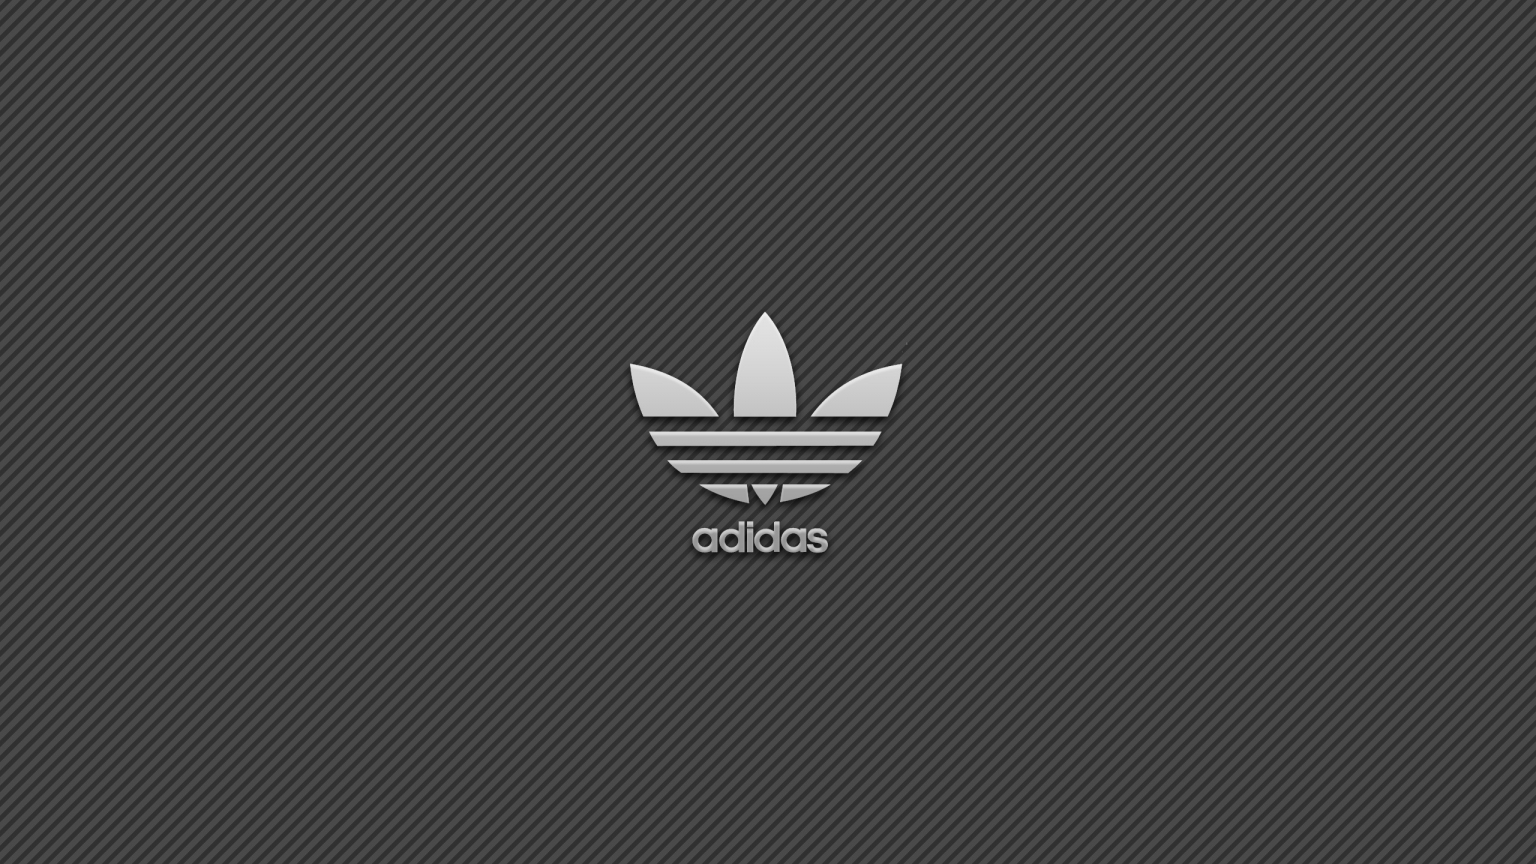 Adidas Simple Logo Background for 1536 x 864 HDTV resolution